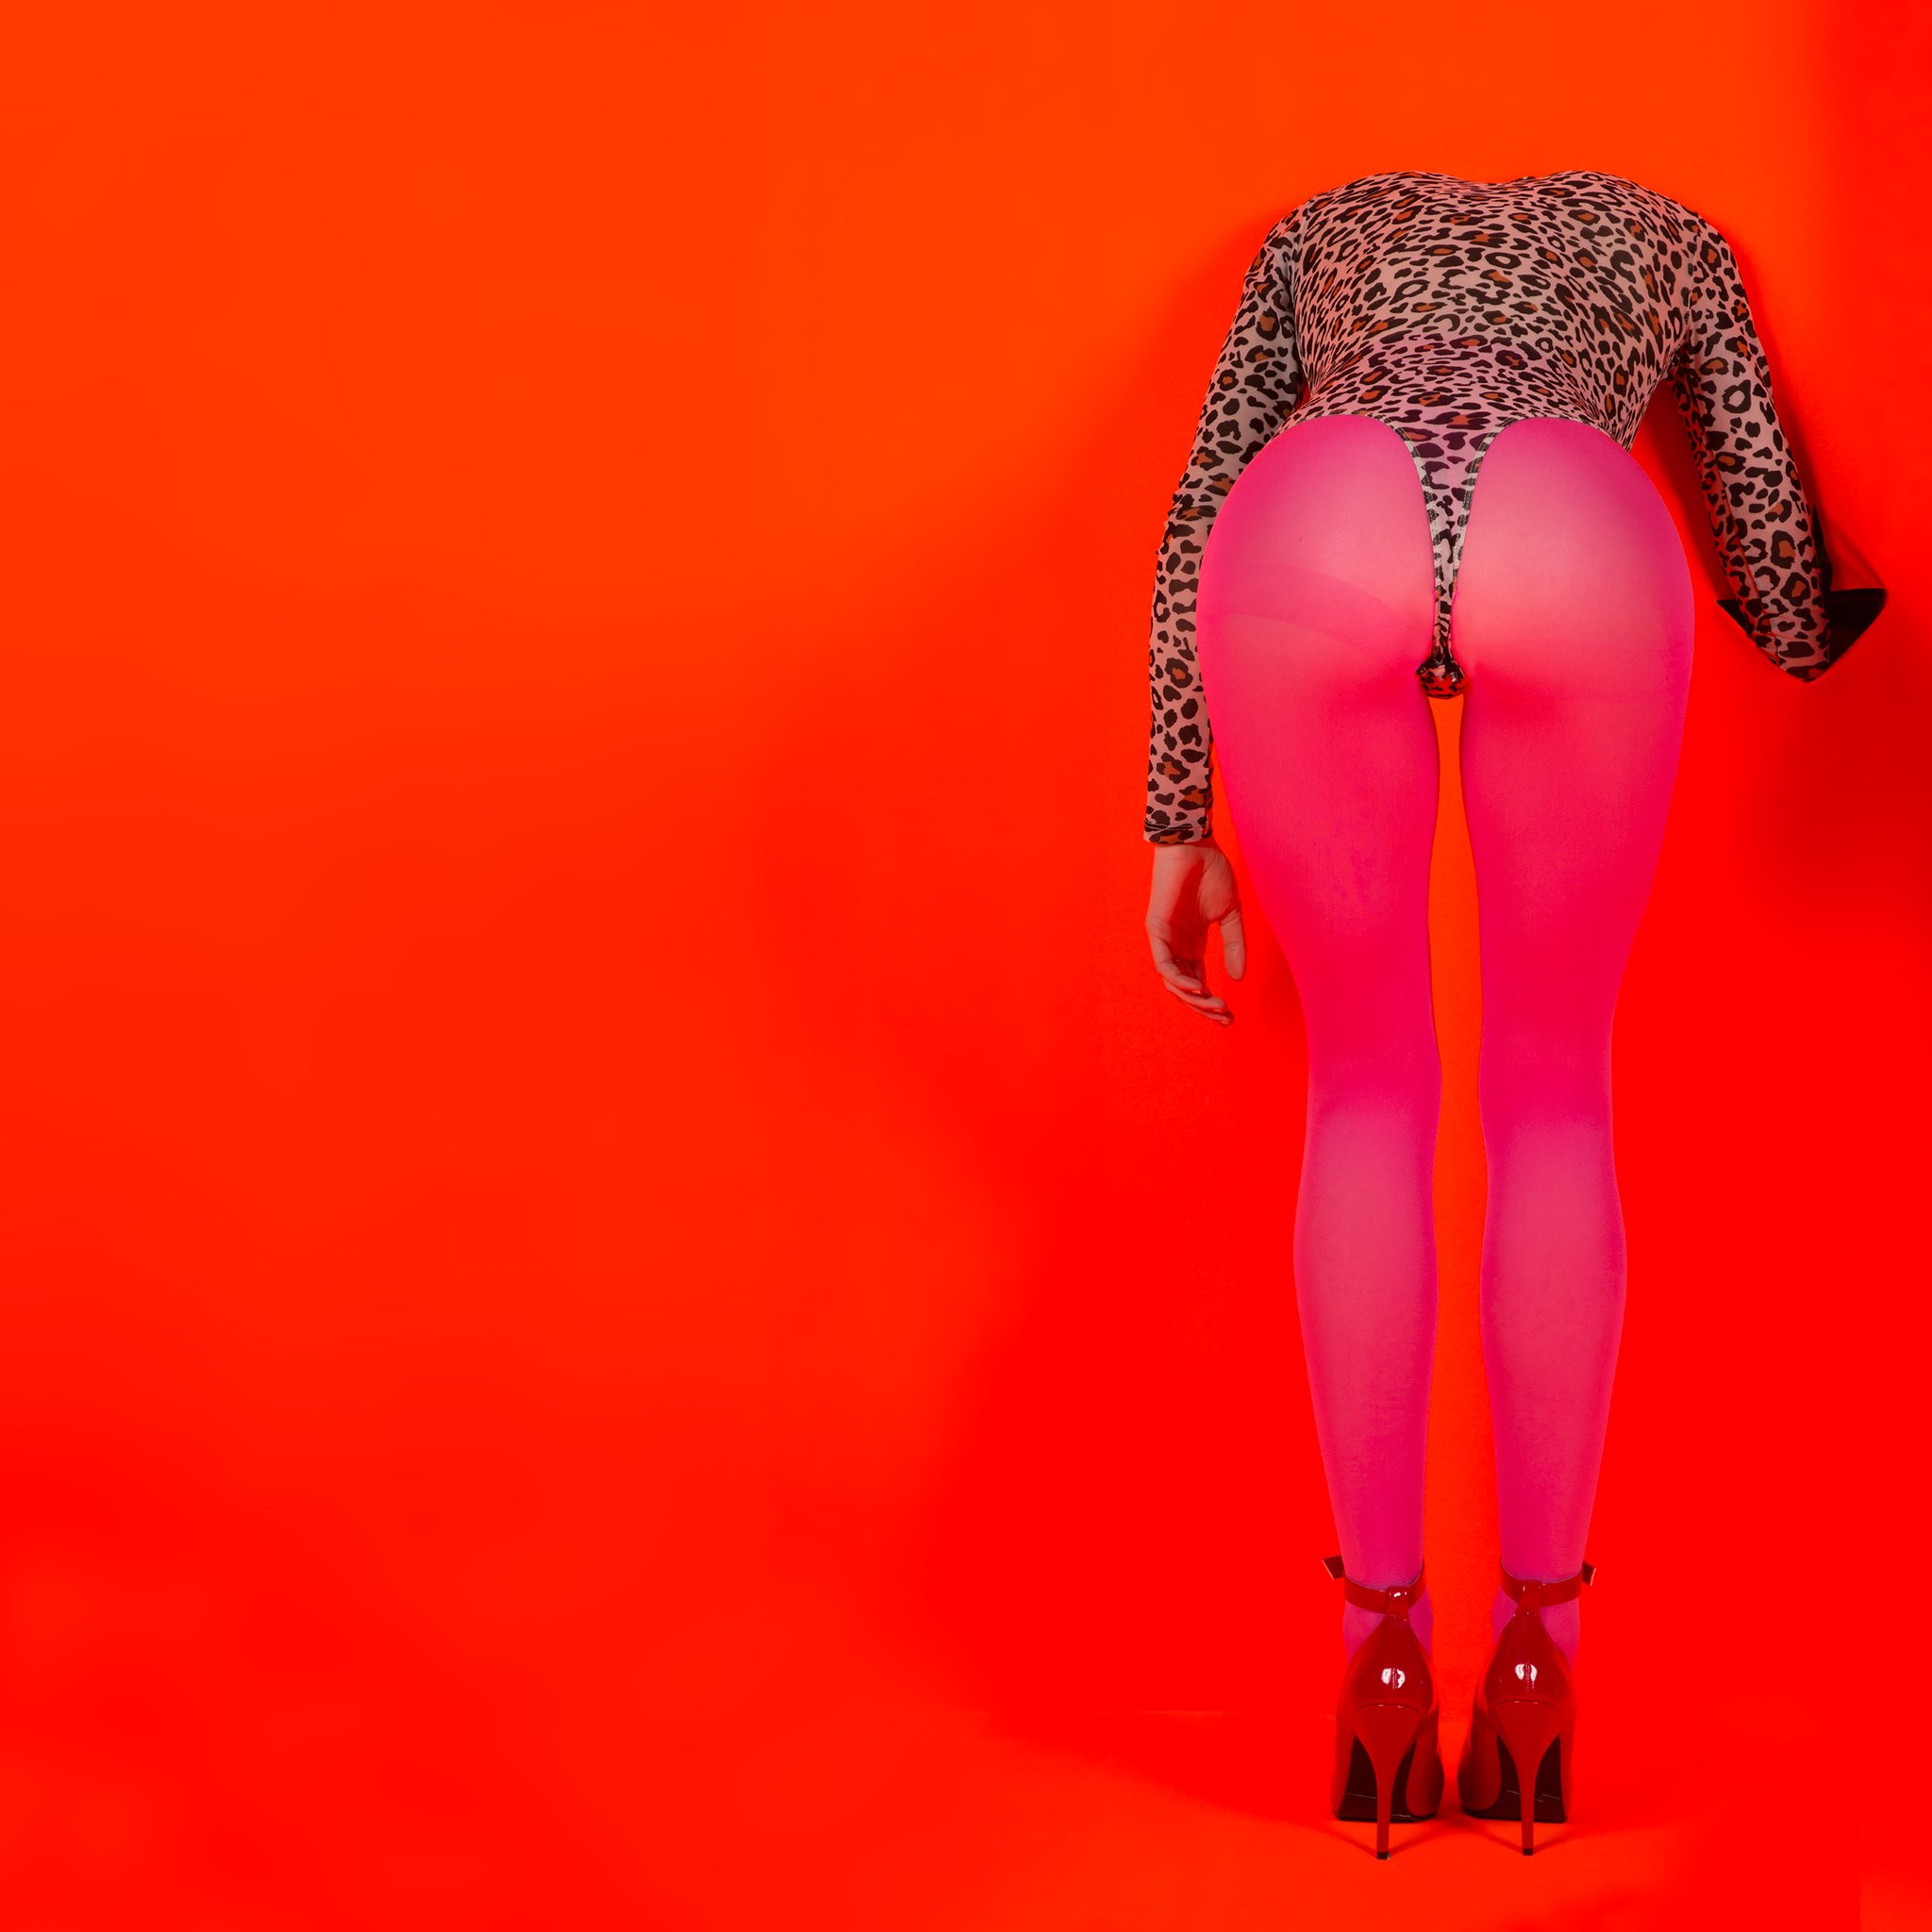 St. Vincent Announces New Album <i>MASSEDUCTION</i>, Releases “Los Ageless”” title=”st.-vincent-1504705703″ data-original-id=”256714″ data-adjusted-id=”256714″ class=”sm_size_full_width sm_alignment_center ” data-image-source=”free_stock” />
<p><strong>St. Vincent<em>, MASSEDUCTION </em>track list<br />
</strong>1. “Hang on Me”<br />
2. “Pills”<br />
3. “Masseduction”<br />
4. “Sugarboy”<br />
5. “Los Ageless”<br />
6. “Happy Birthday, Johnny”<br />
7. “Savior”<br />
8. “New York”<br />
9. “Fear The Future”<br />
10. “Young Lover”<br />
11. “Dancing with a Ghost”<br />
12. “Slow Disco”<br />
13. “Smoking Section”</p>
</p>		</div>
				</div>
						</div>
					</div>
		</div>
								</div>
					</div>
		</section>
				<section data-particle_enable=